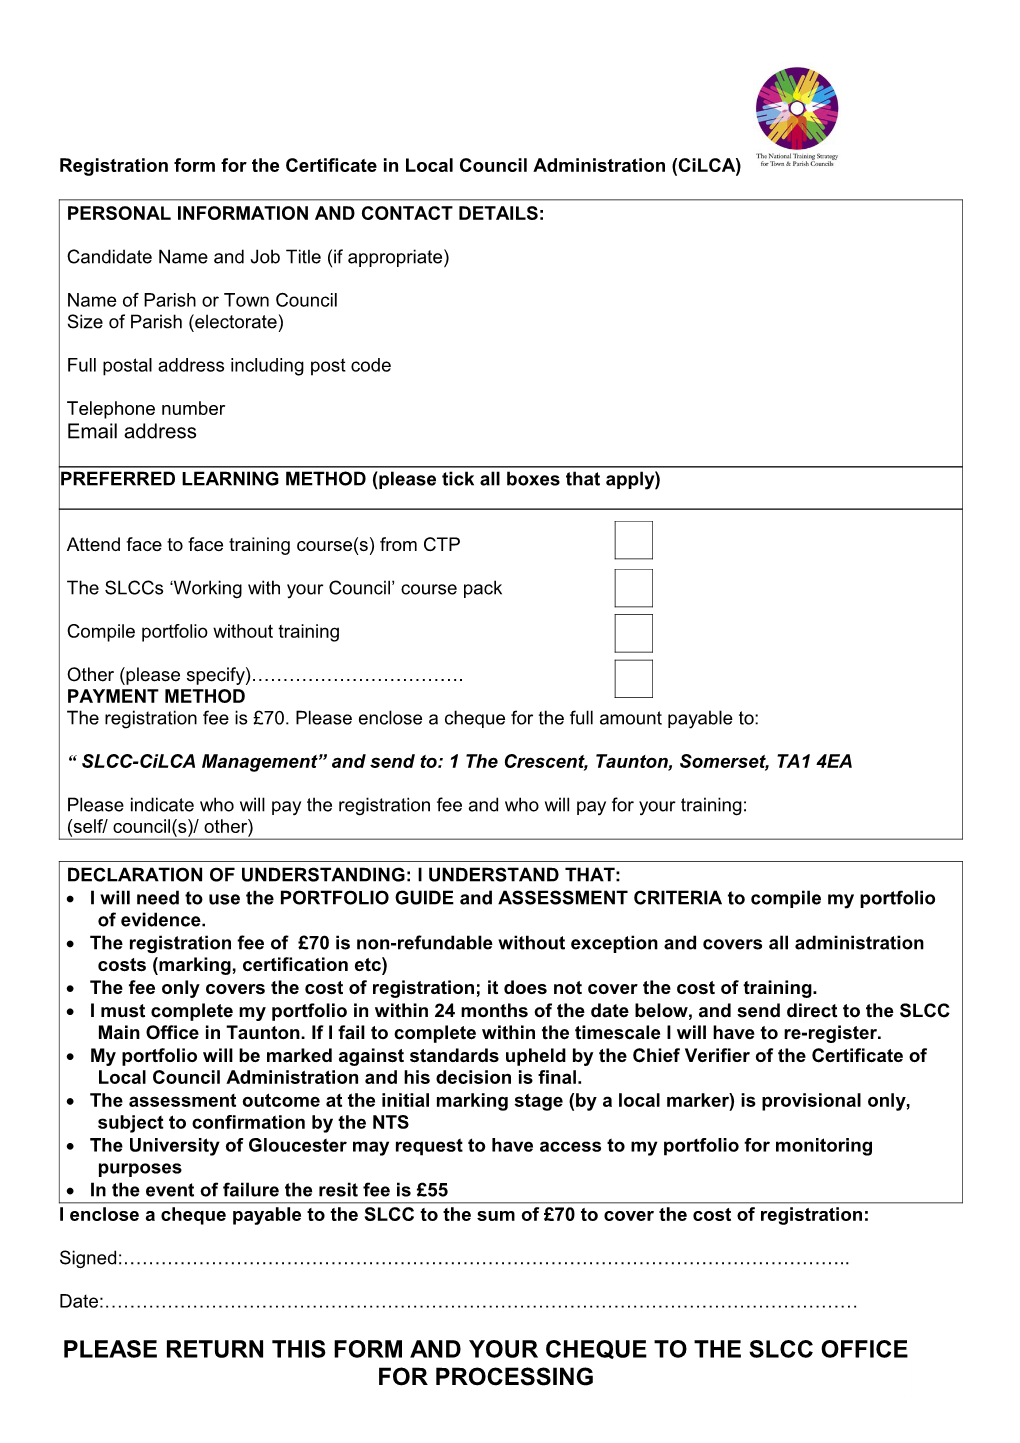 Registration Form for the Certificate in Local Council Administration (Cilca)